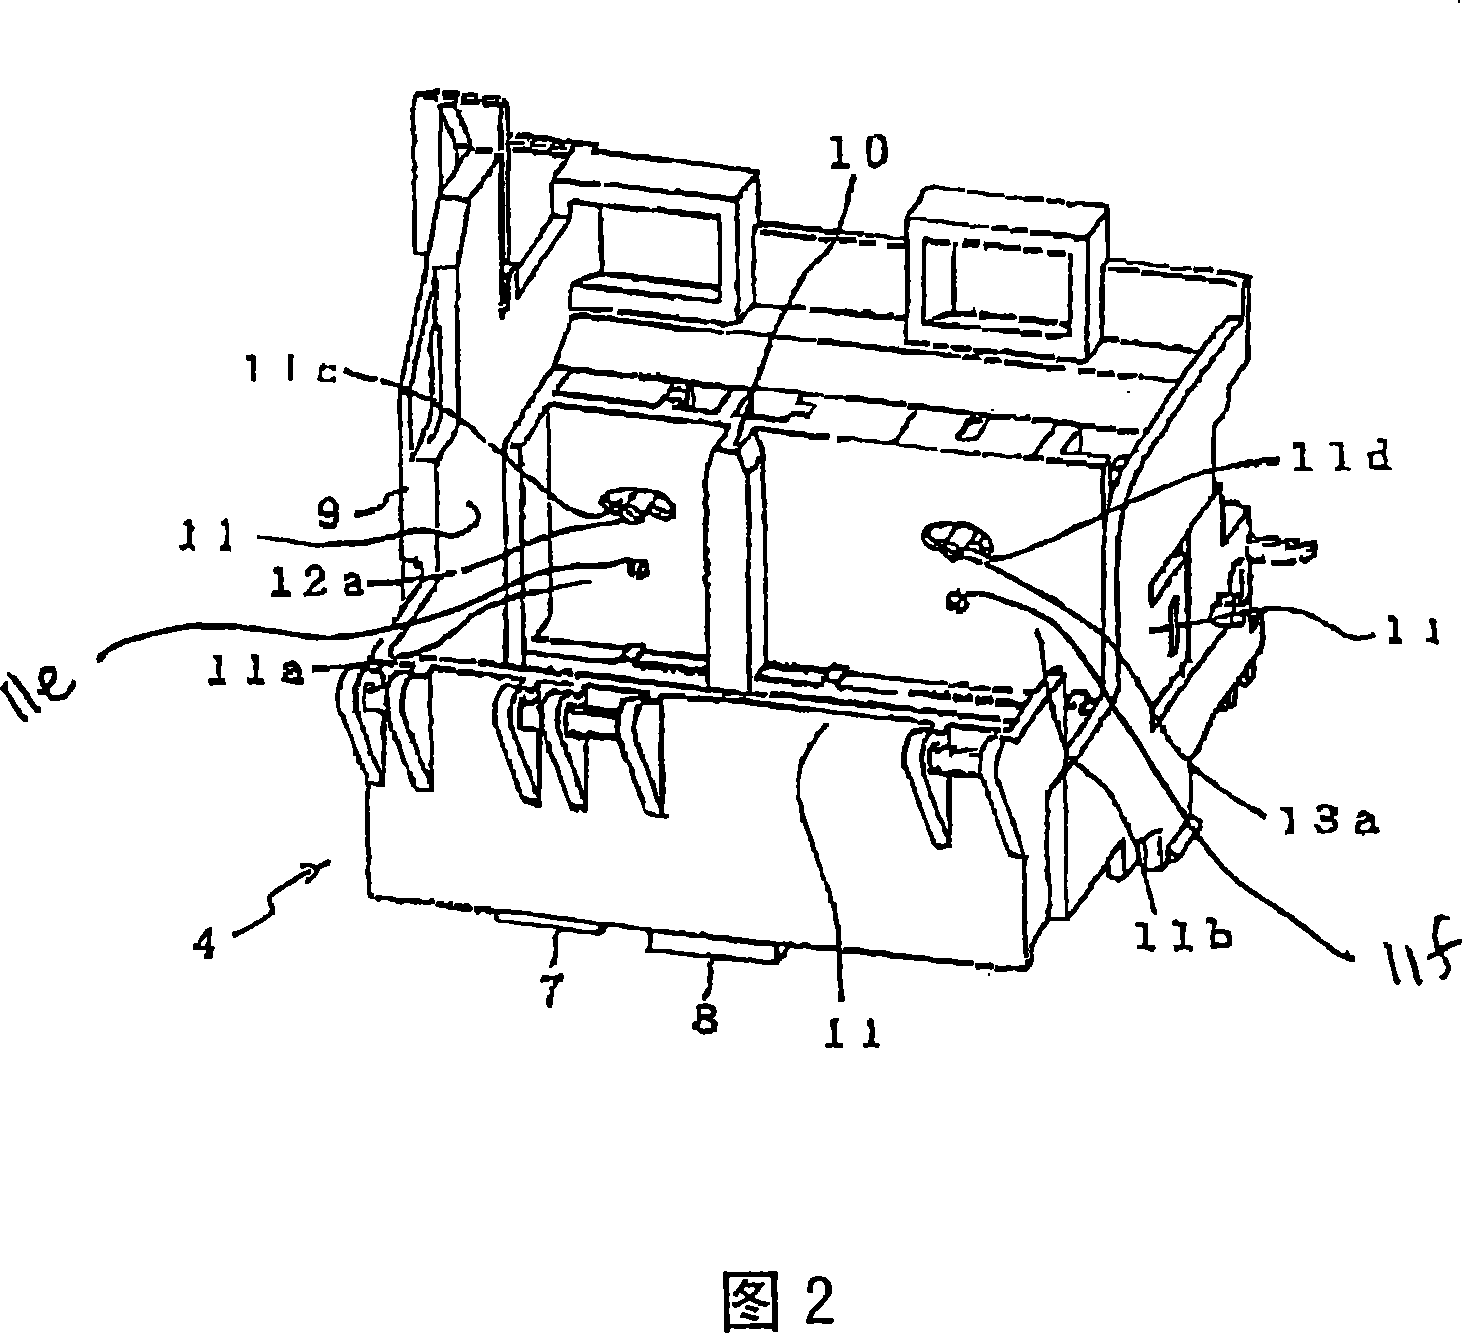 Ink-jet recording device and cartridge